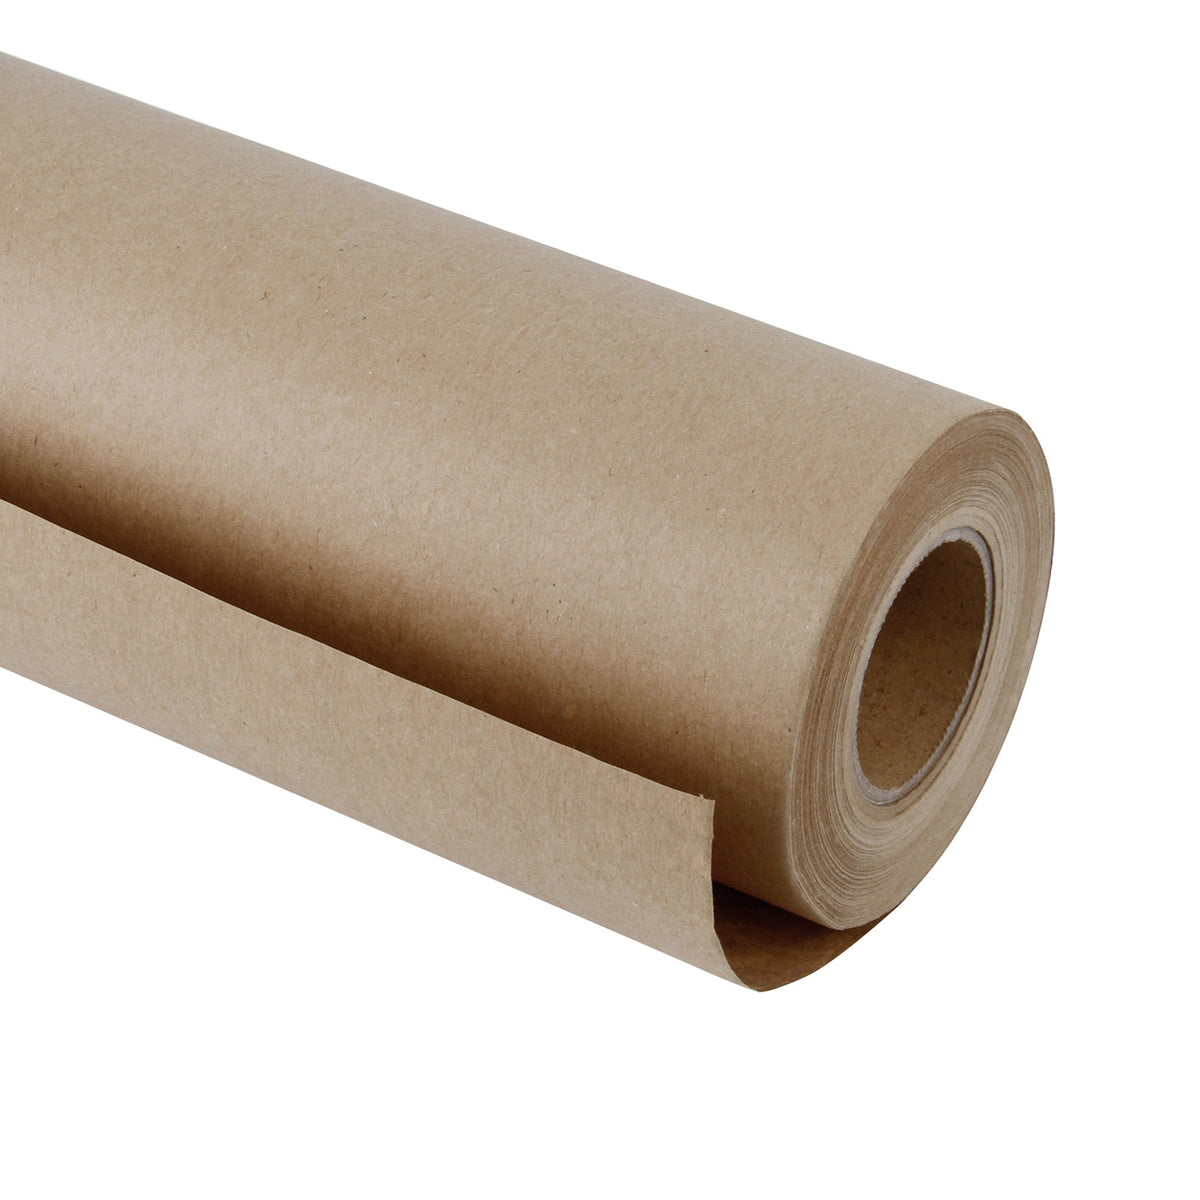 RUSPEPA Black Kraft Paper Roll - 36 inches x 100 feet - Recyclable Paper  Perfect for Wrapping, Craft, Packing, Floor Covering, Dunnage, Parcel,  Table Runner - Yahoo Shopping